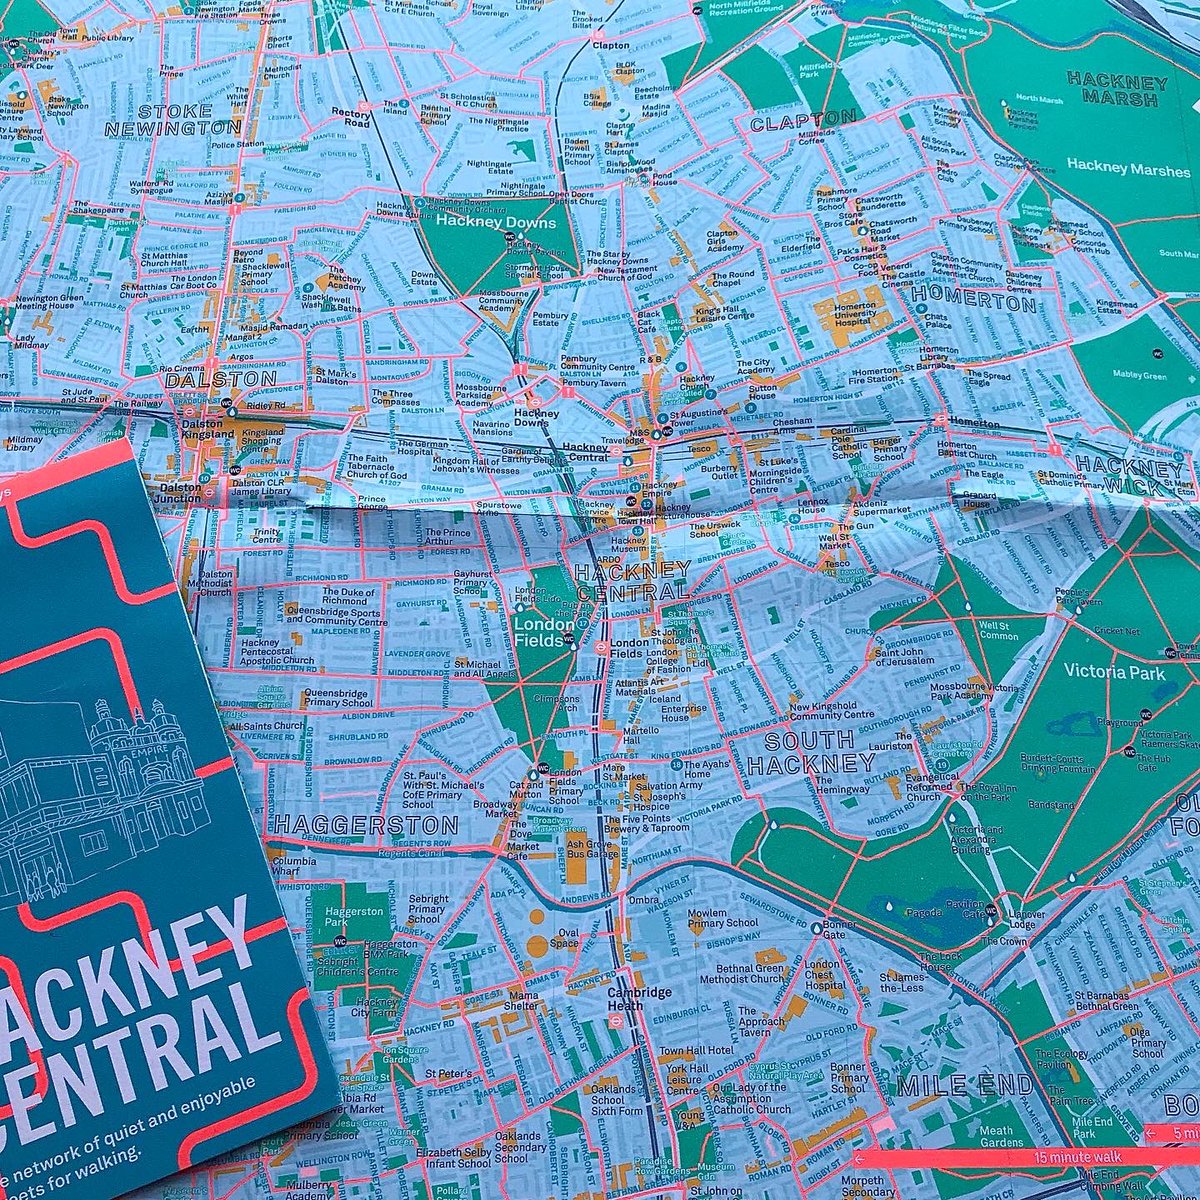 Very happy to have done some illustrations for the #hackneycentral @FootwaysLondon Walking Map supported by @hackneycouncil @mayorofhackney Available free, both paper and digital. Visit footways.london It’s amazing what you find when you look around you.